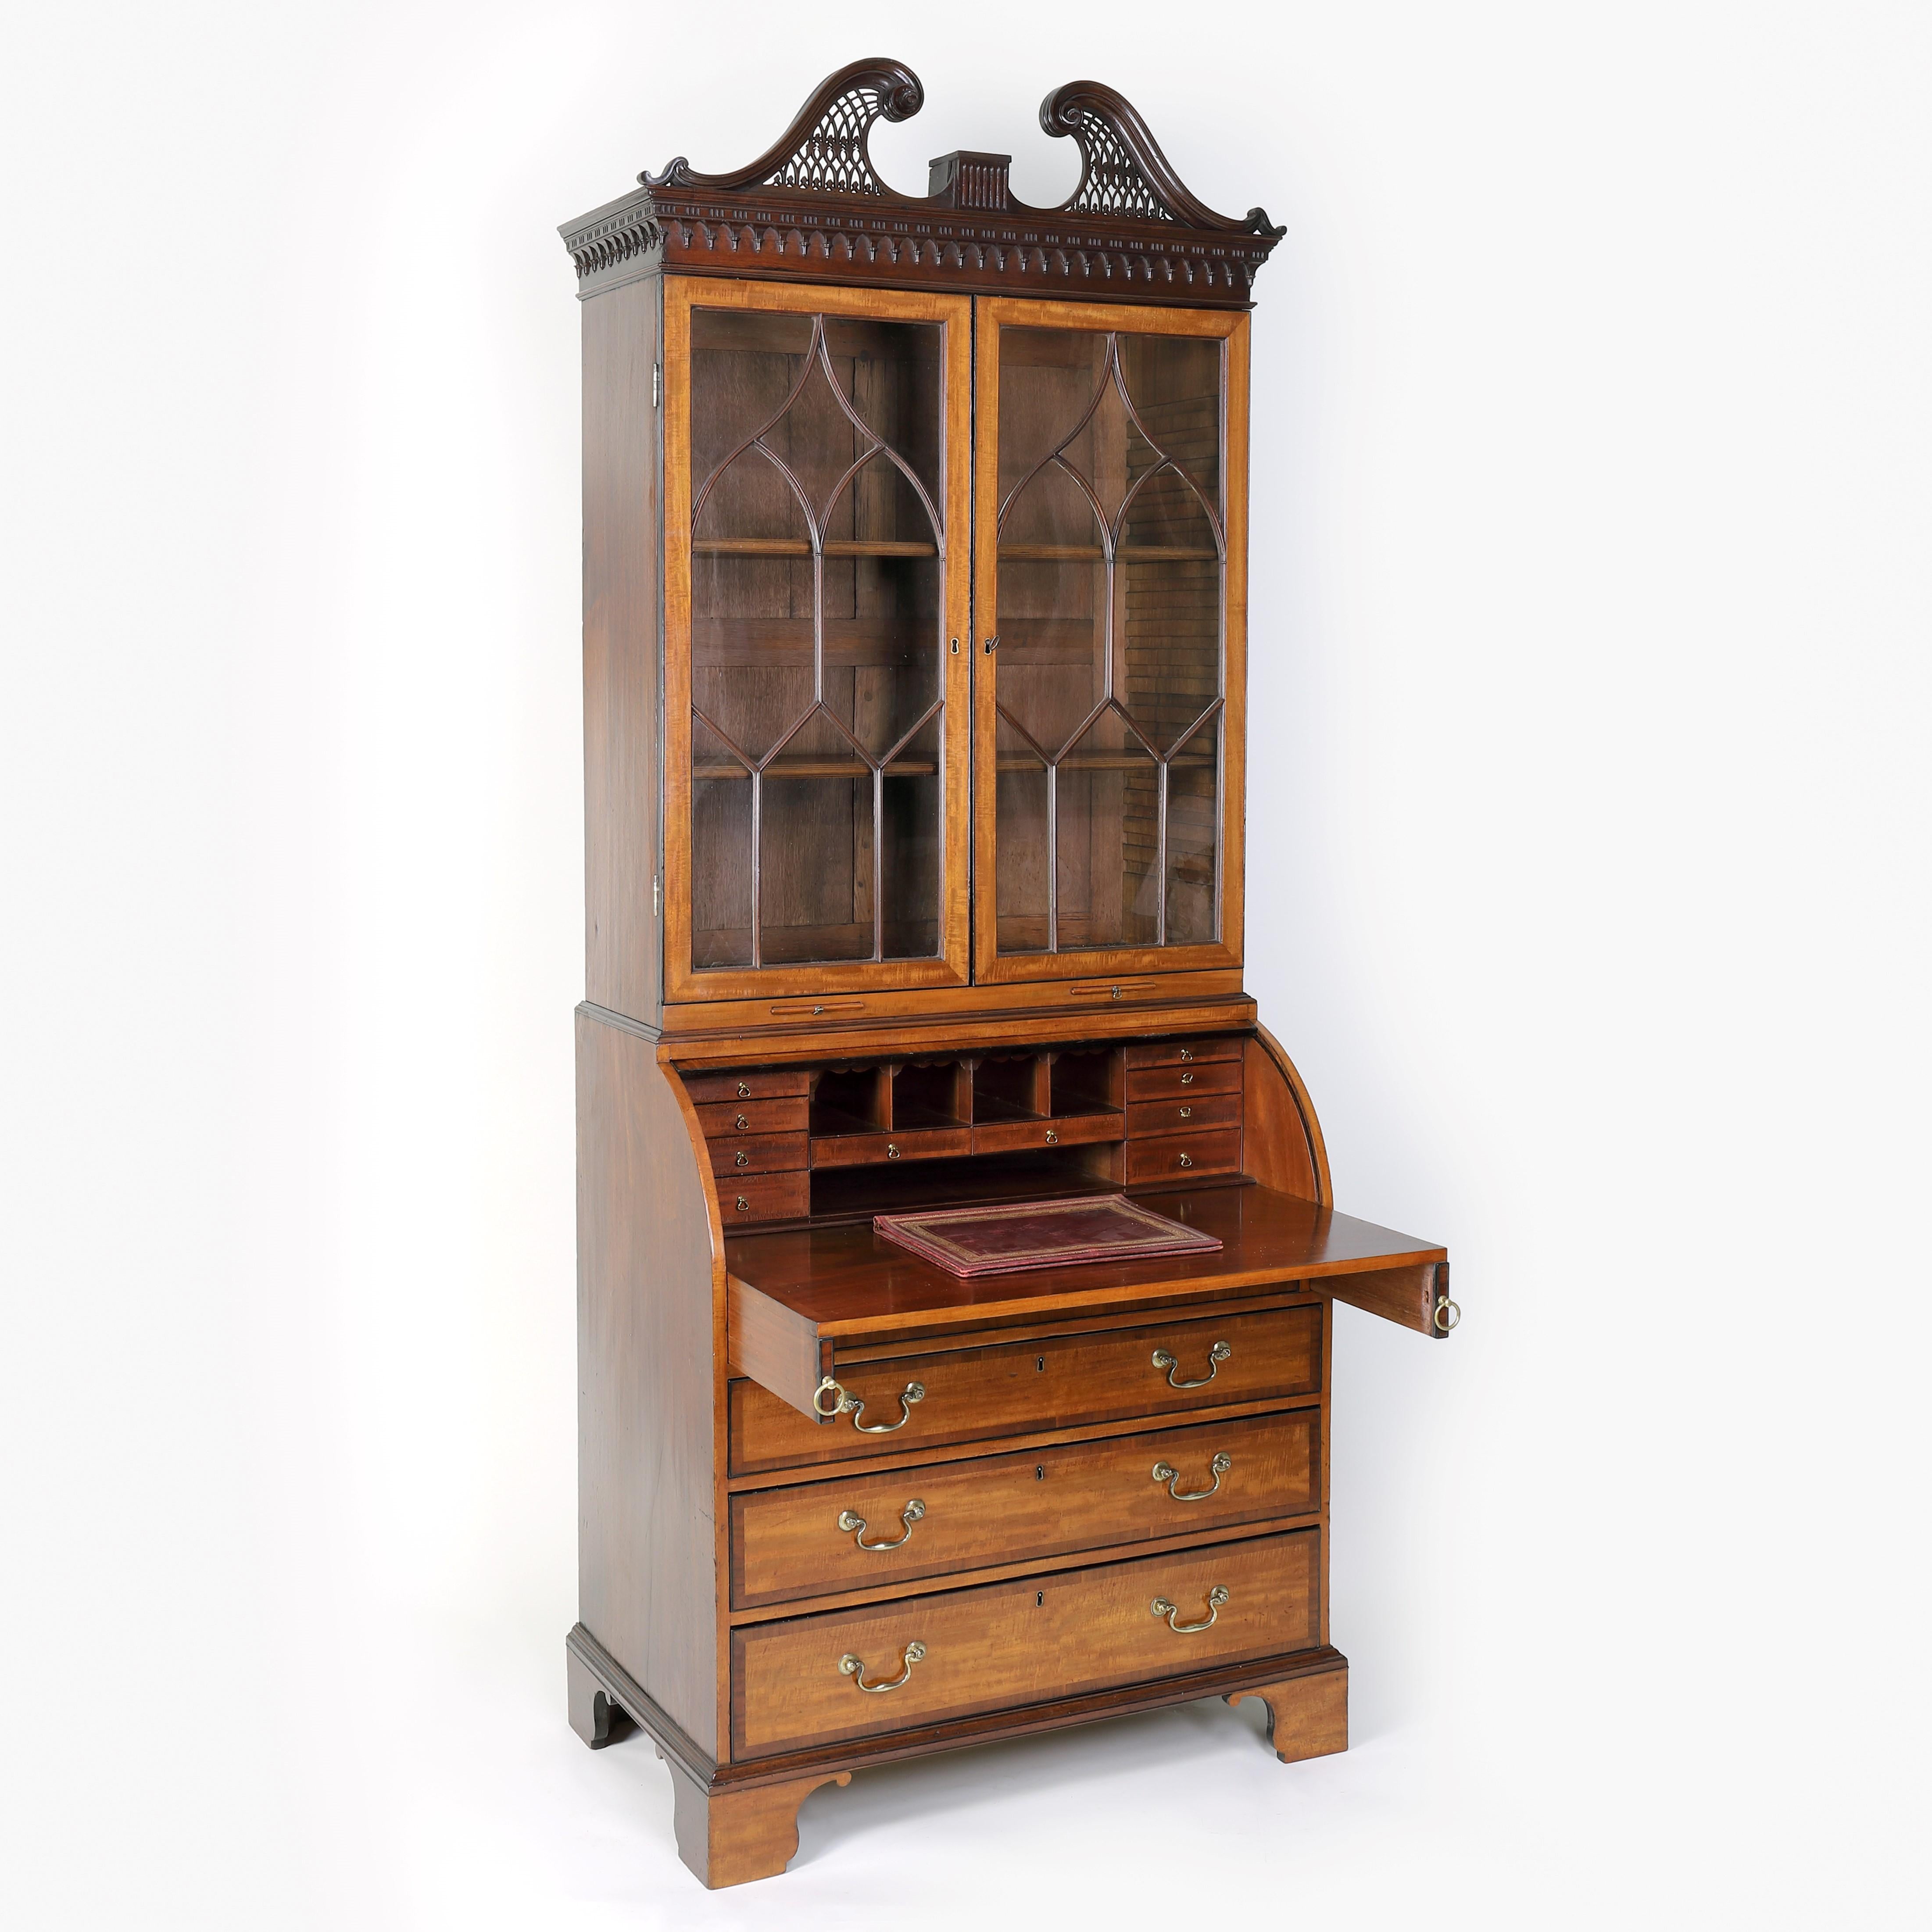 An exceptional and remarkable late 18th century satinwood and mahogany cylinder bureau bookcase of outstanding quality and attributable to Thomas Shearer.
This magnificent bookcase is constructed to the highest standards of craftsmanship, with